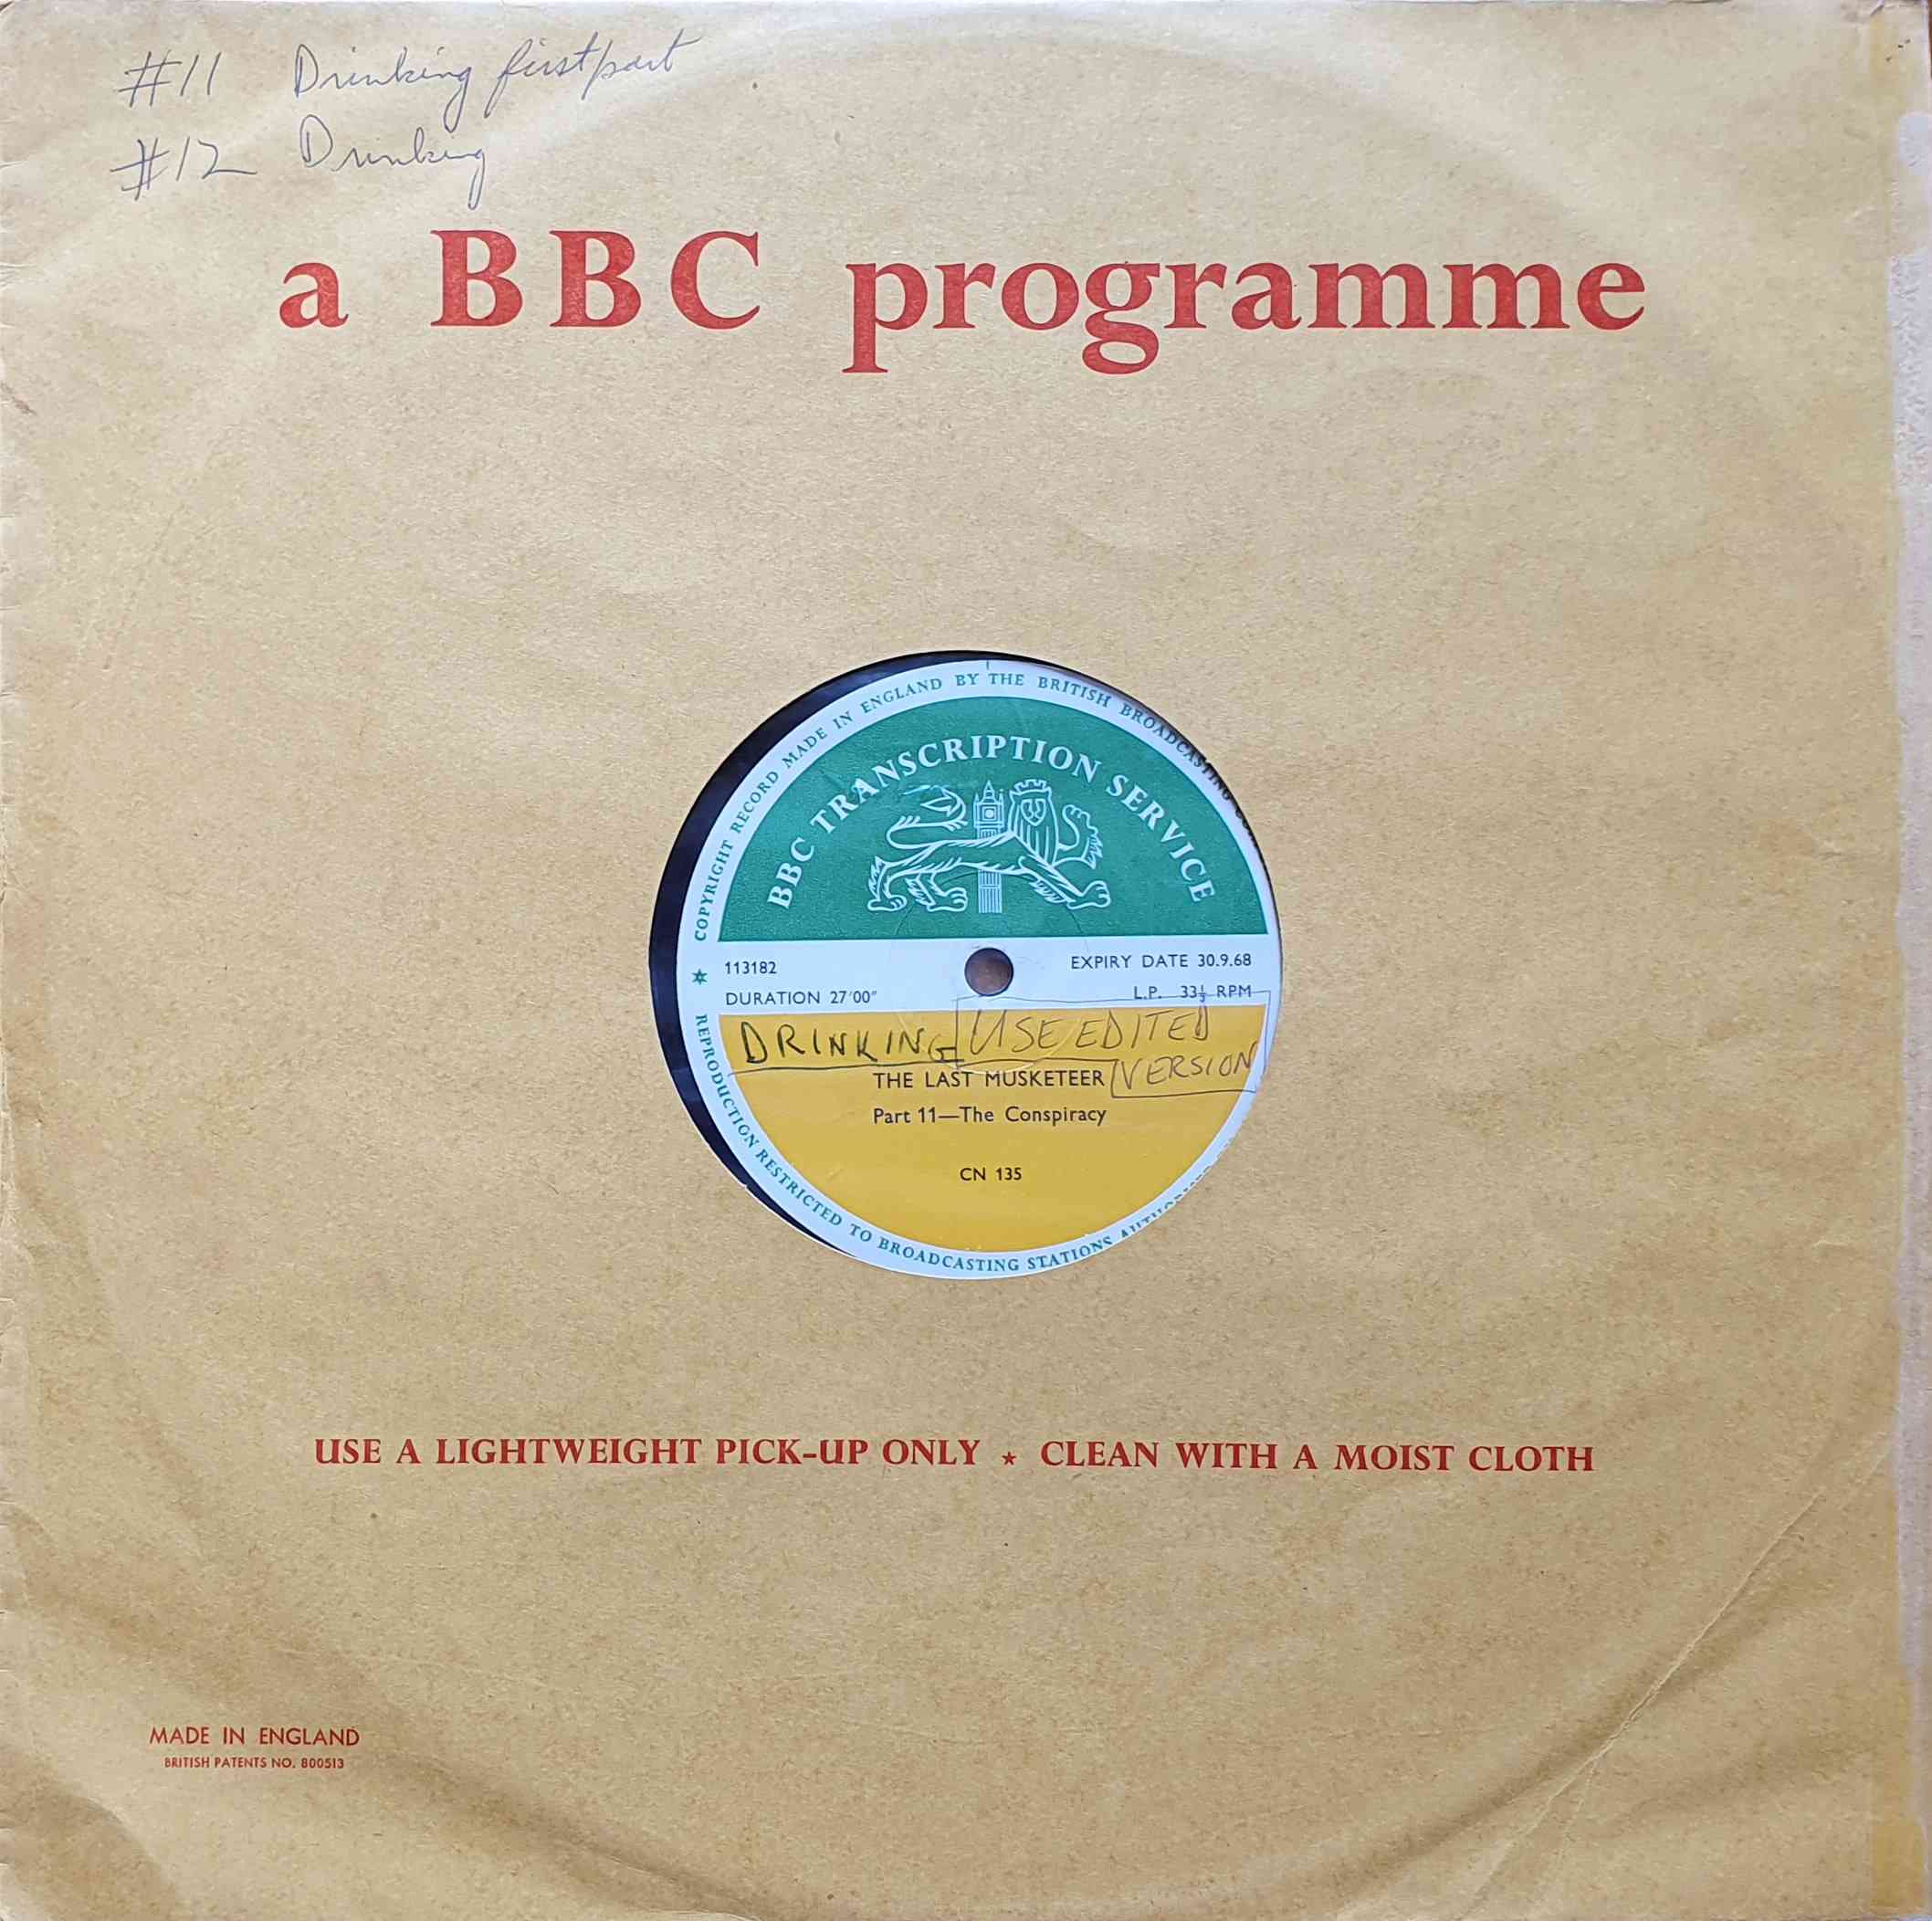 Picture of CN 135 6 The last musketeer - Parts 11 & 12 by artist Unknown from the BBC albums - Records and Tapes library